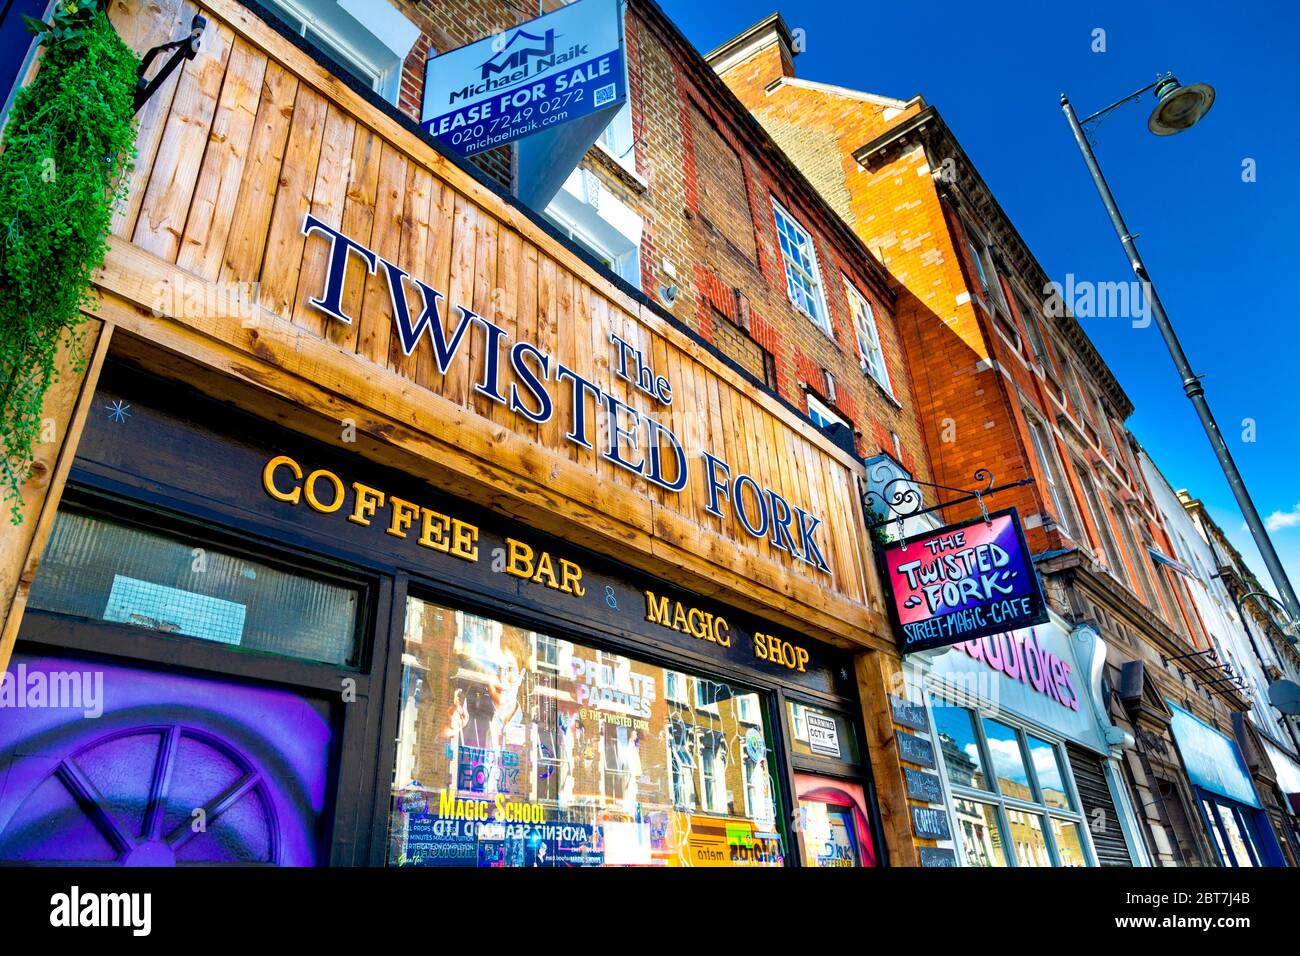 The Twisted Fork Street Magic Cafe and Shop, Londres, Reino Unido Foto de stock